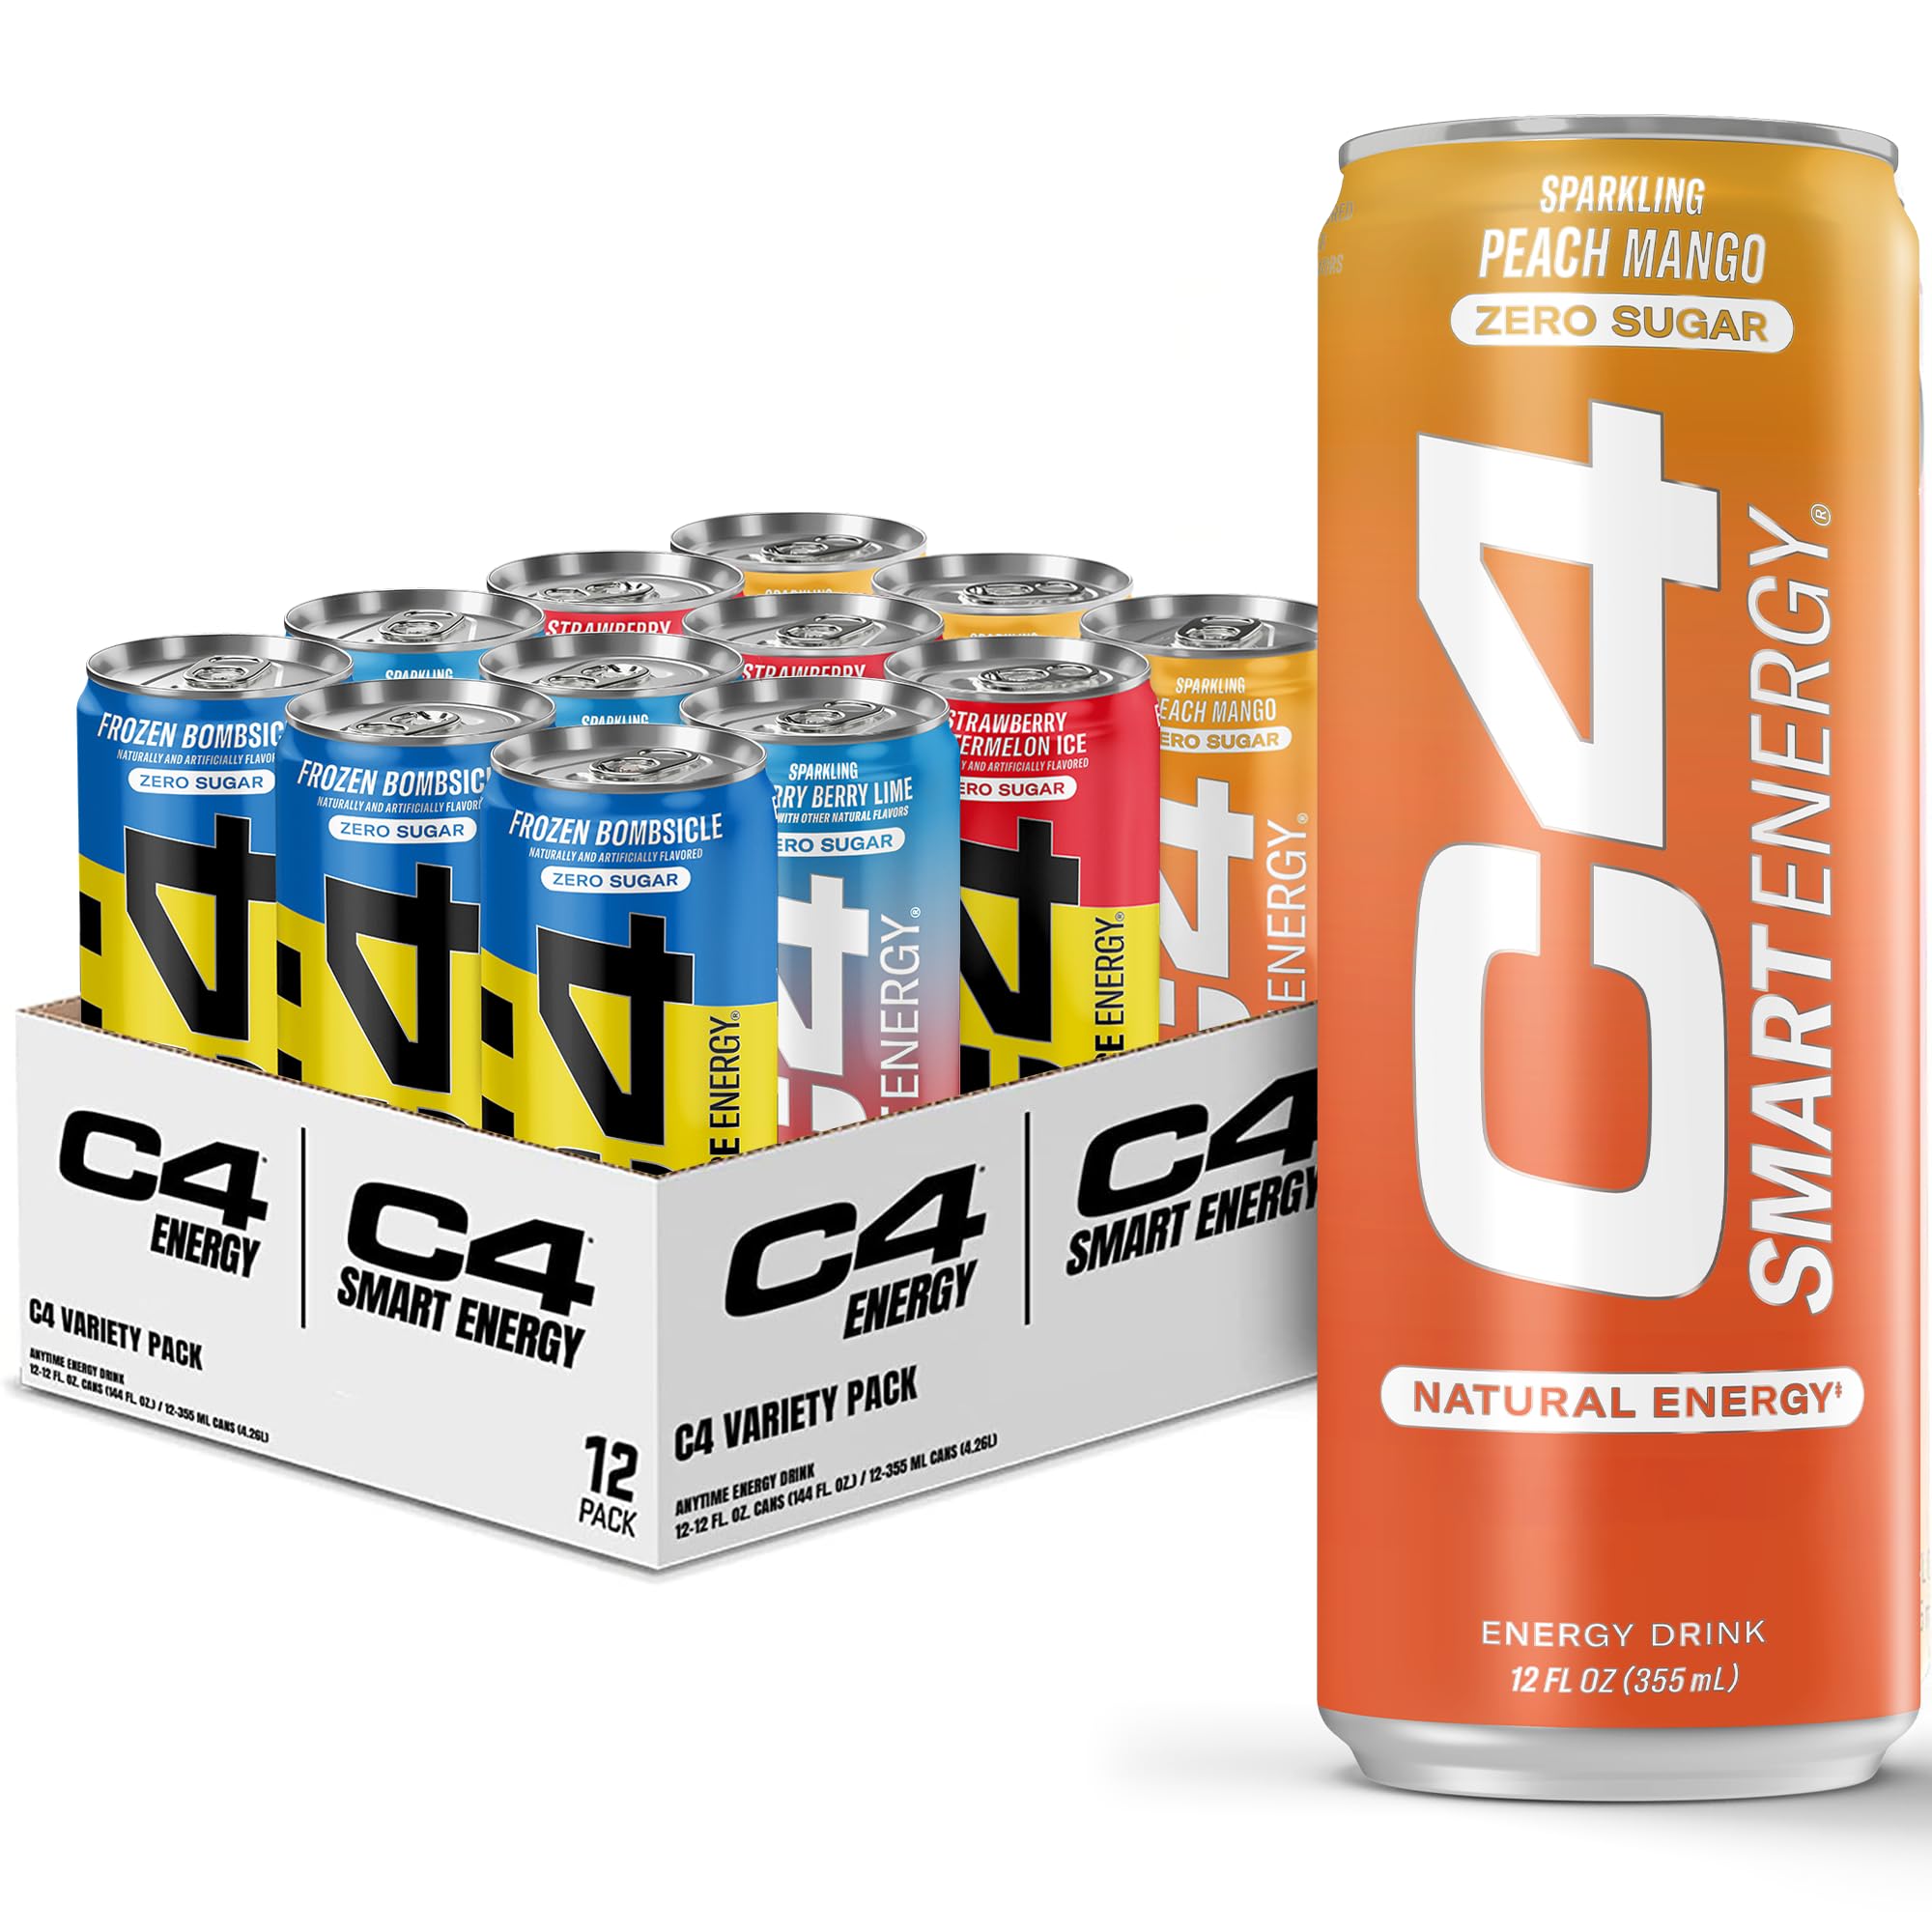 C4 Energy & Smart Energy Drinks Variety Pack, Sugar Free Pre Workout Performance Drink With No Artificial Colors or Dyes, Zero Calorie, Coffee Substitute or Alternative, 4 Flavor Variety 12 Pack